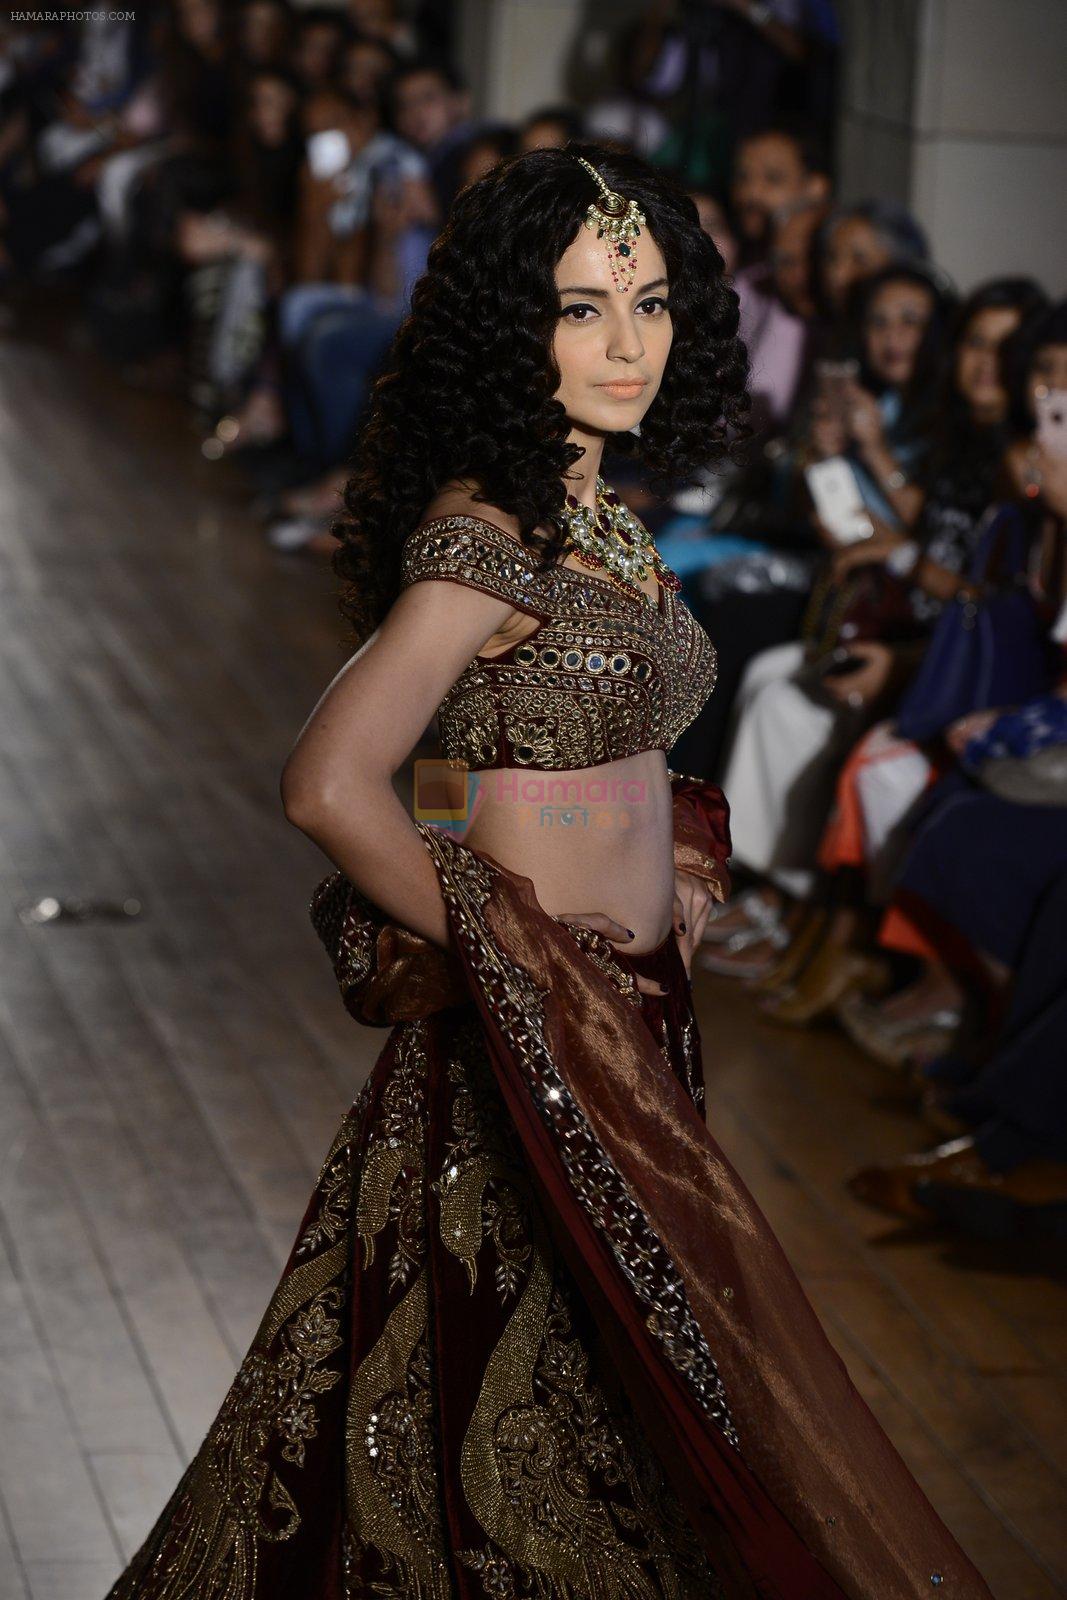 Kangana Ranaut walks for Manav Gangwani latest collection Begum-e-Jannat at the FDCI India Couture Week 2016 on 24 July 2016